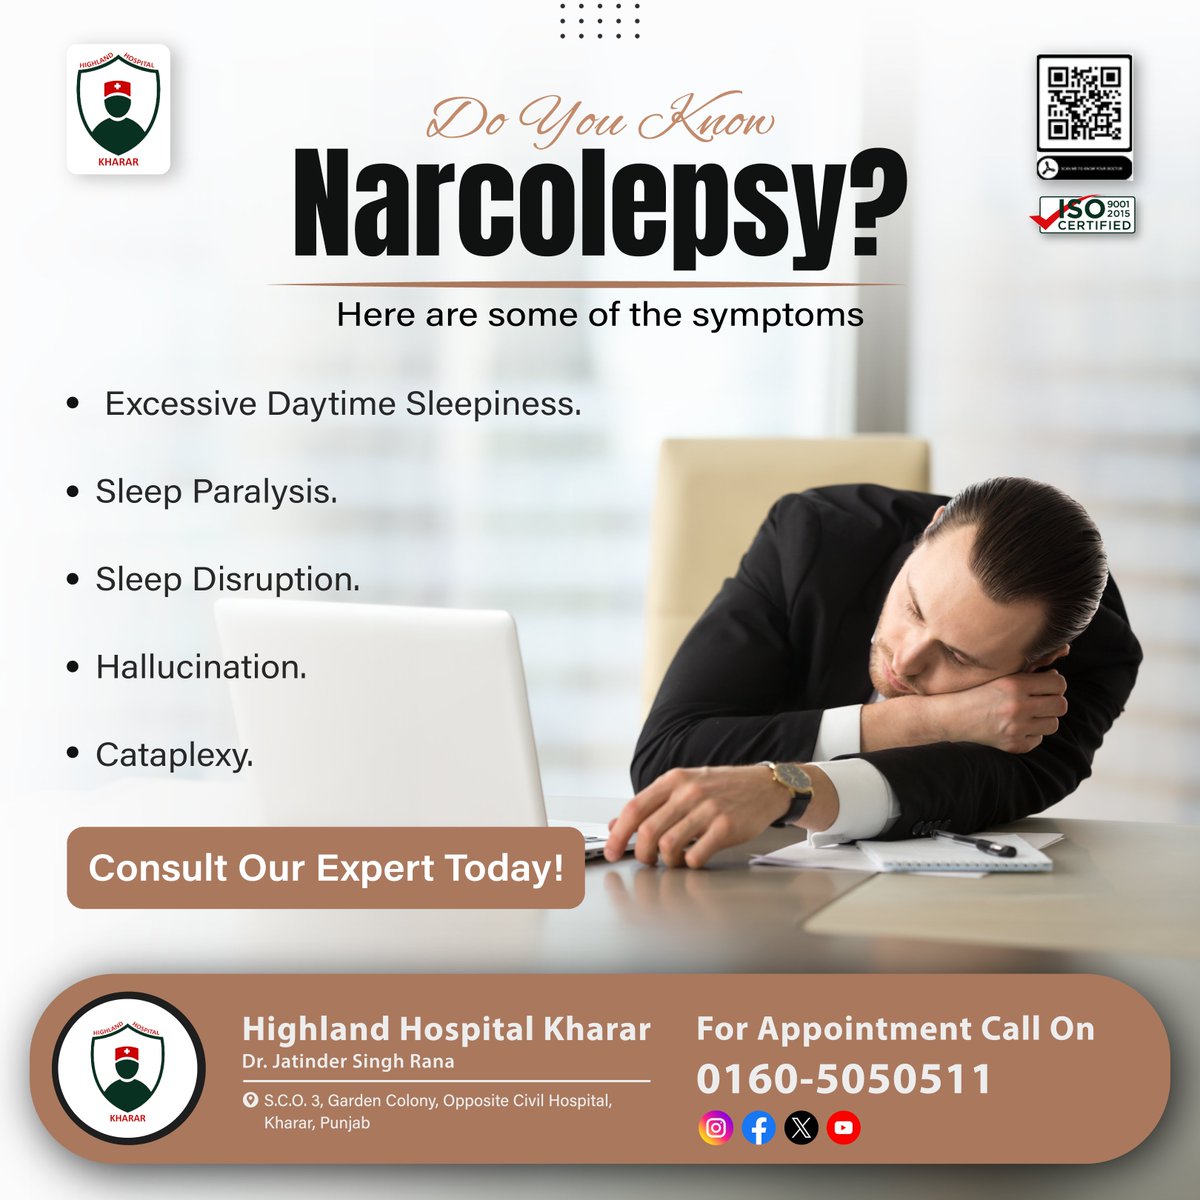 Narcolepsy is more than just excessive daytime #sleepiness. It's a complex #neurologicaldisorder with various #symptoms. At #HighlandHospitalKharar, we're here to help you understand and manage these symptoms.
.
#Kharar #Mohali #DrJatinderSingh #Besthospital #Narcolepsy